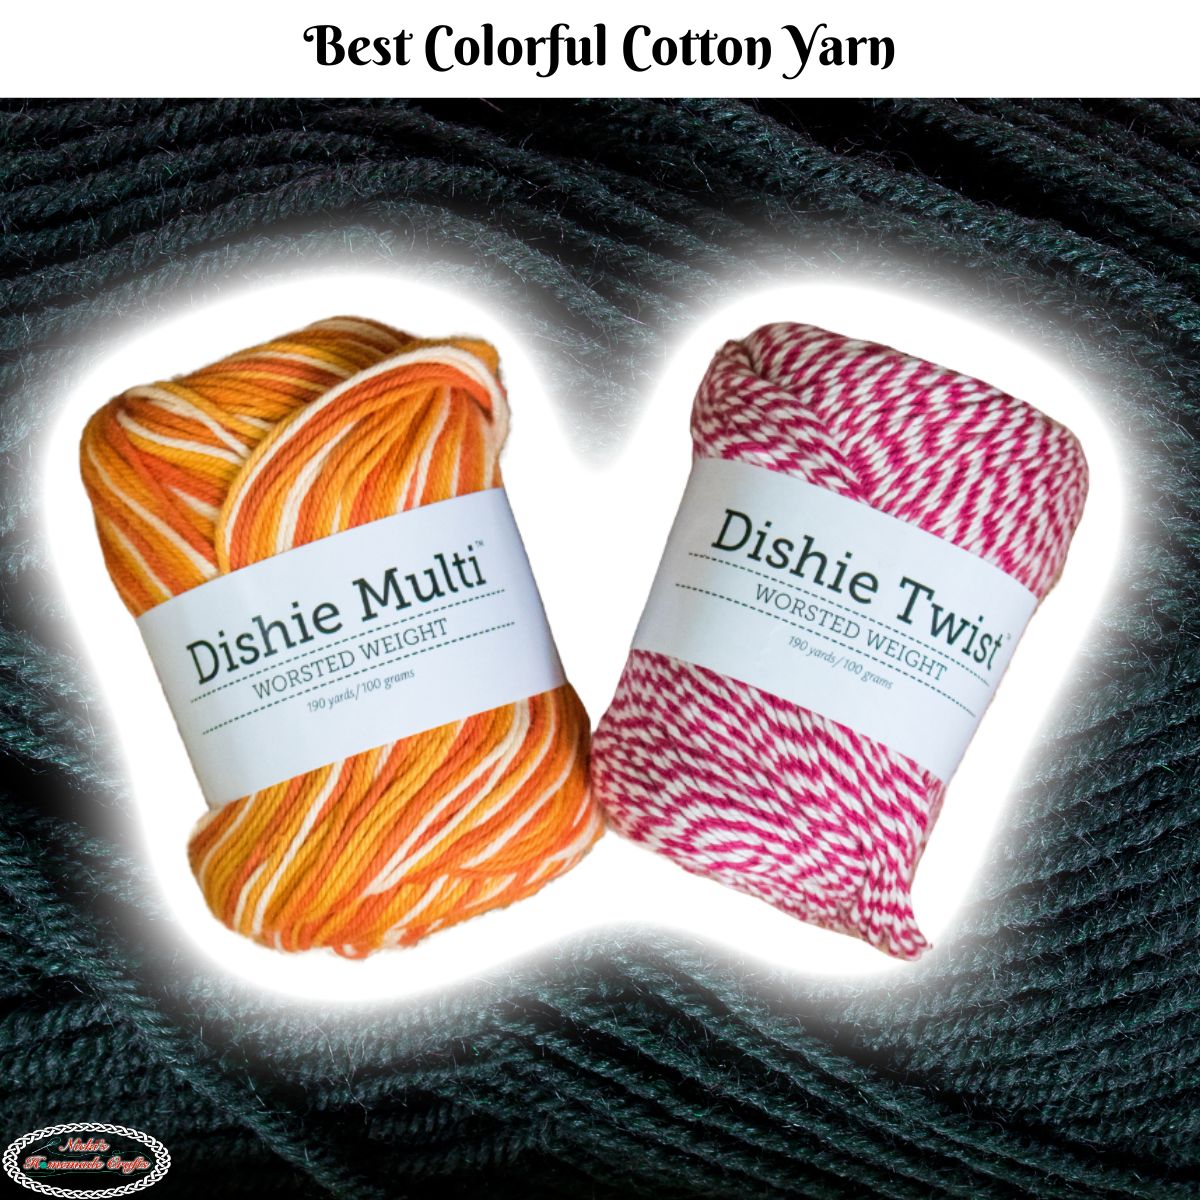 Best Multi-Colored Cotton Yarn for Crochet - Nicki's Homemade Crafts